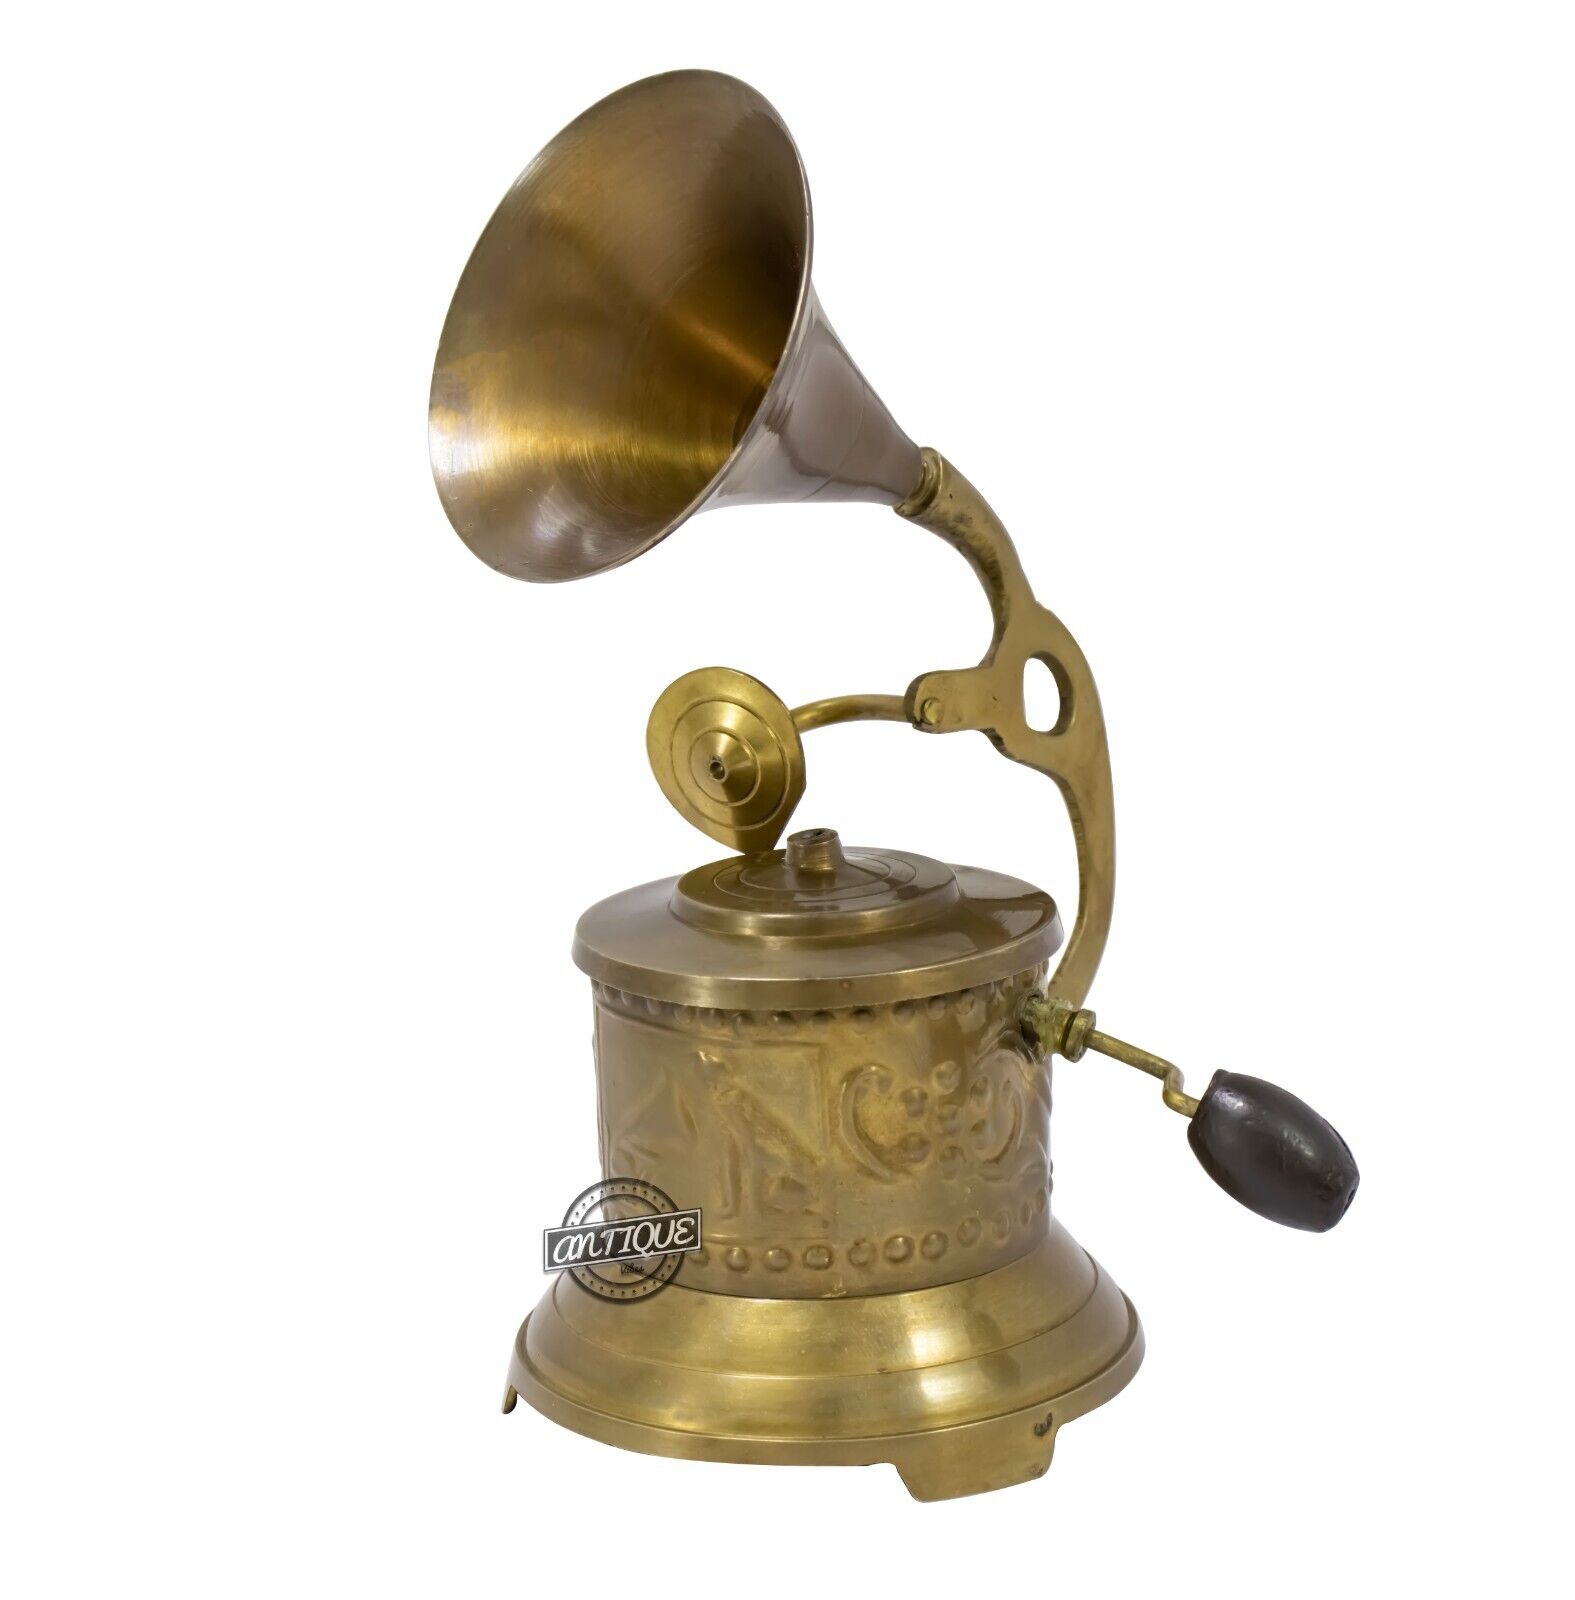 Vintage Style Gramophone Brass Best Gift For Studio/Home Decor Gift -Non-Working